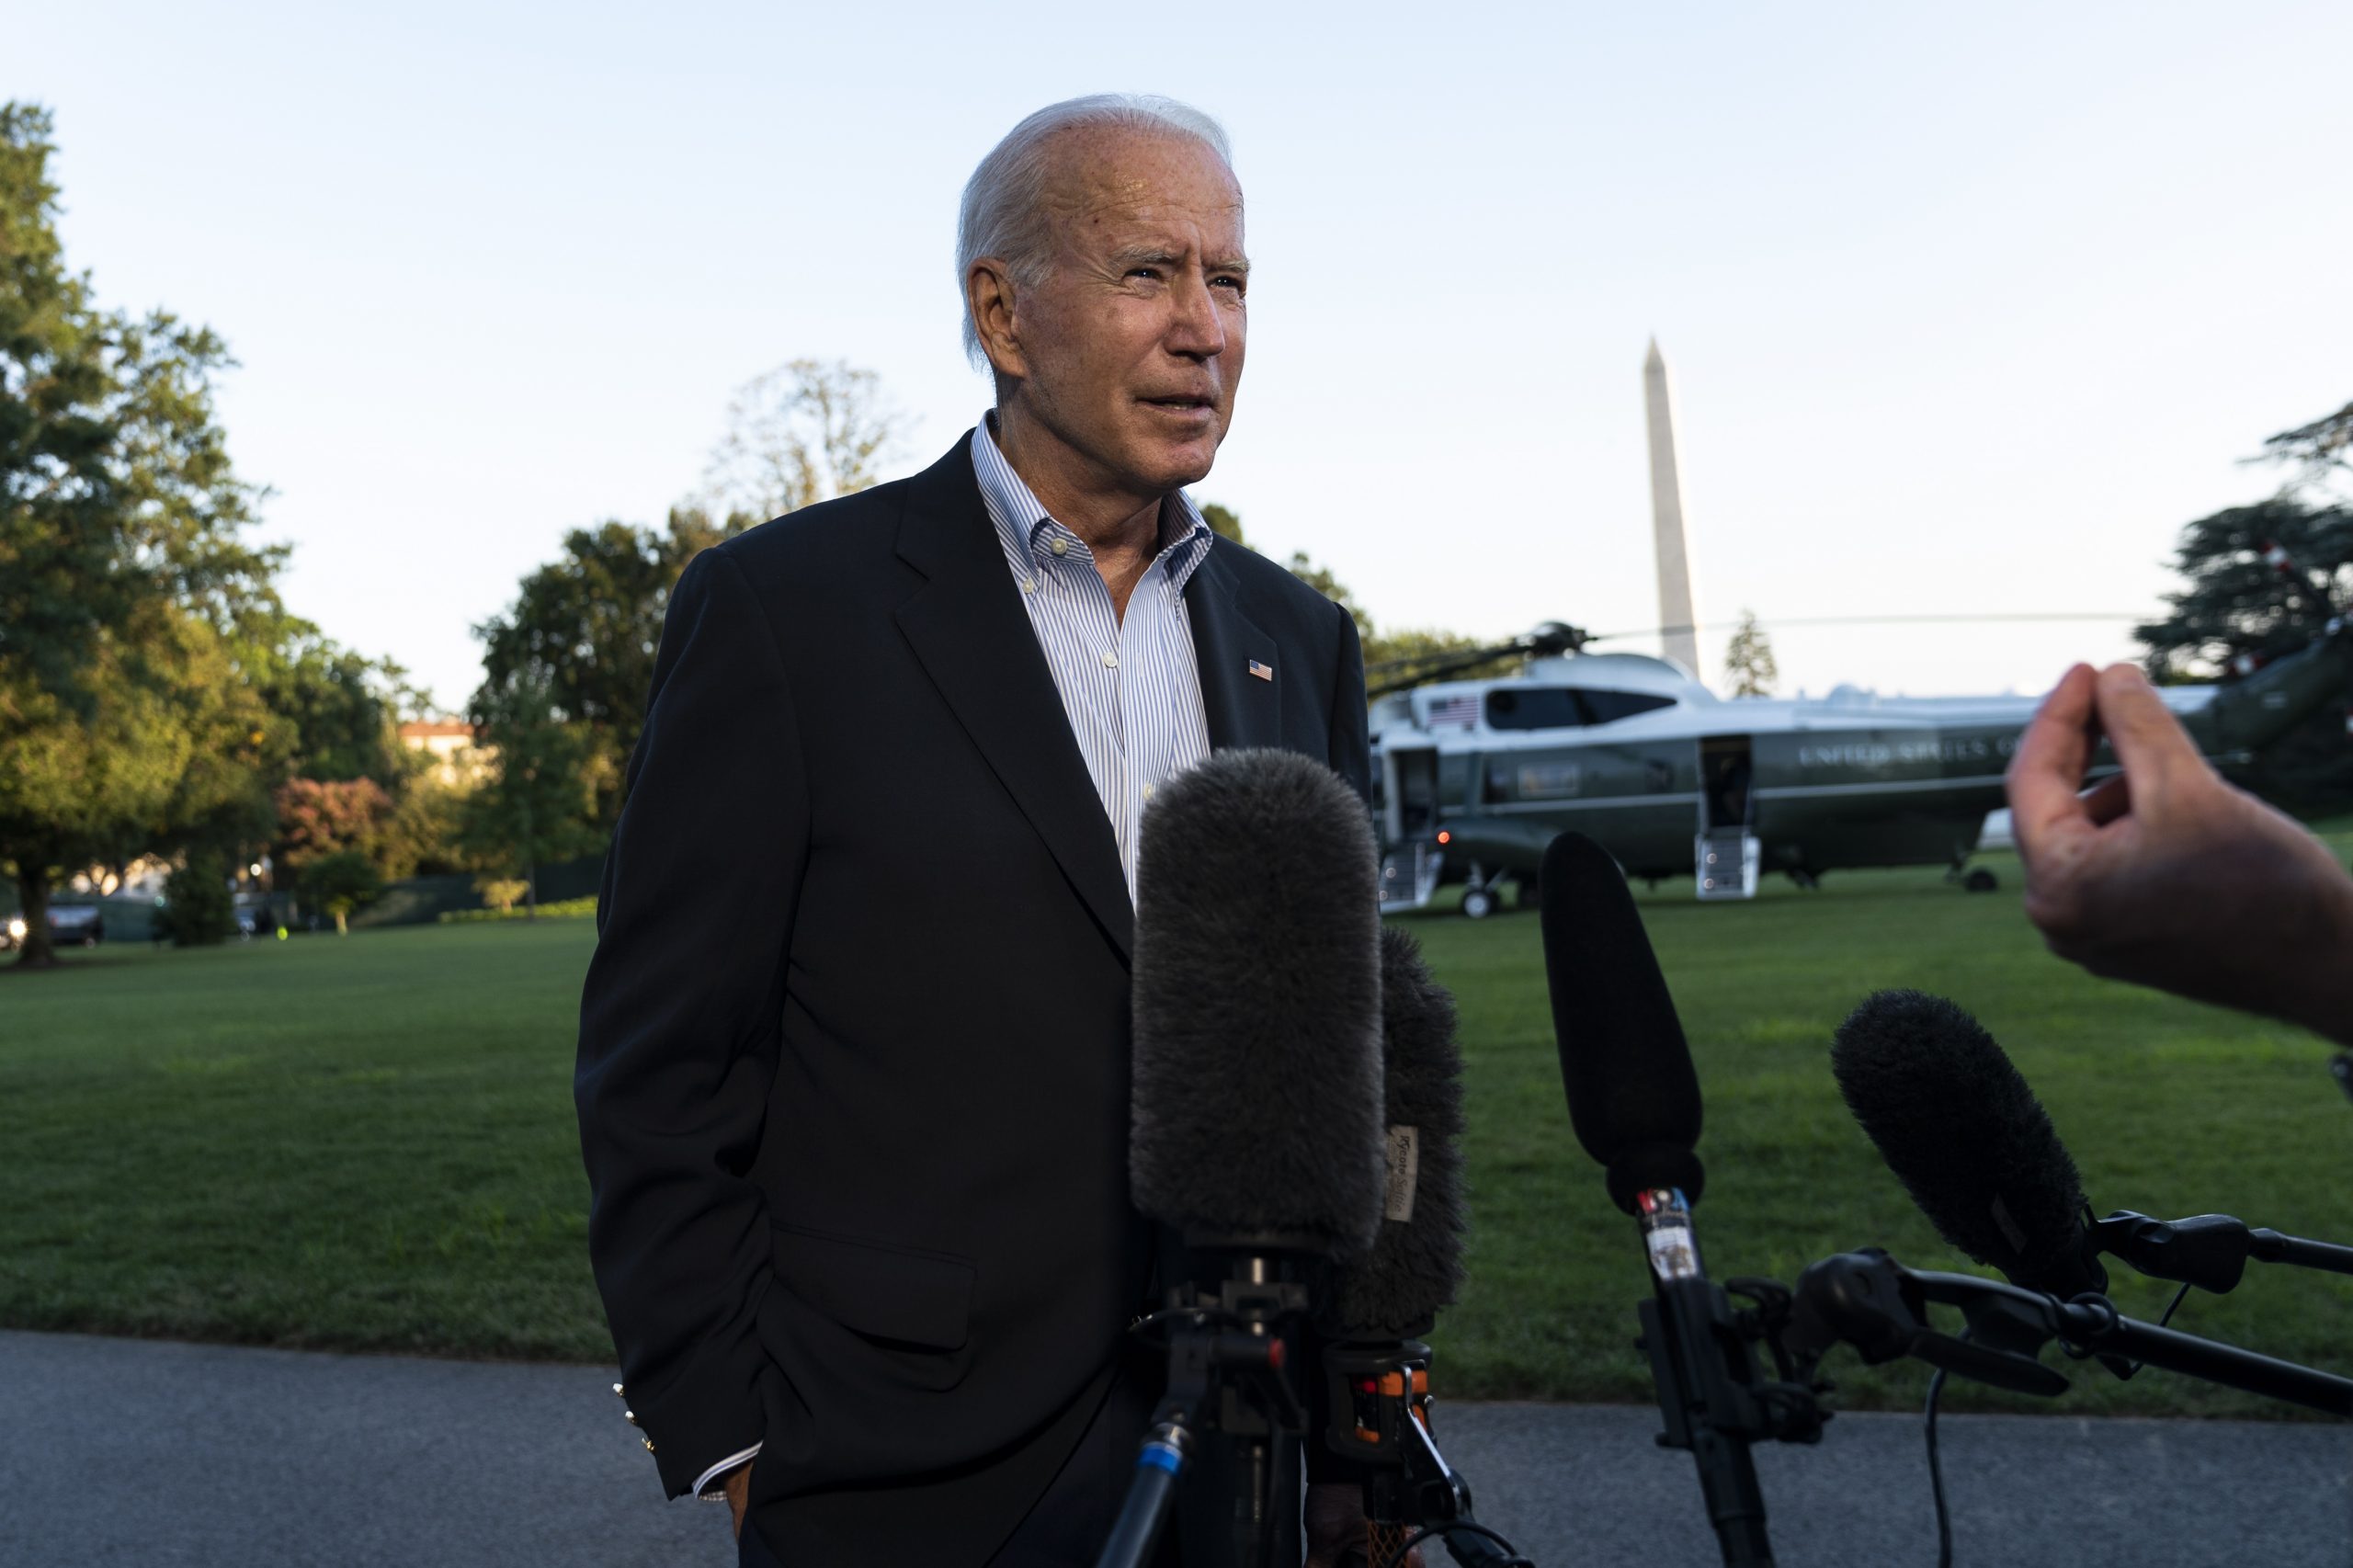 epa09454304 US President Joe Biden speaks with reporters after arriving at the White House via Marine One, in Washington, DC, USA, 07 September 2021. Biden traveled to New Jersey and New York to tour areas effected by Hurricane Ida and met with local leaders.  EPA/Alex Edelman / POOL